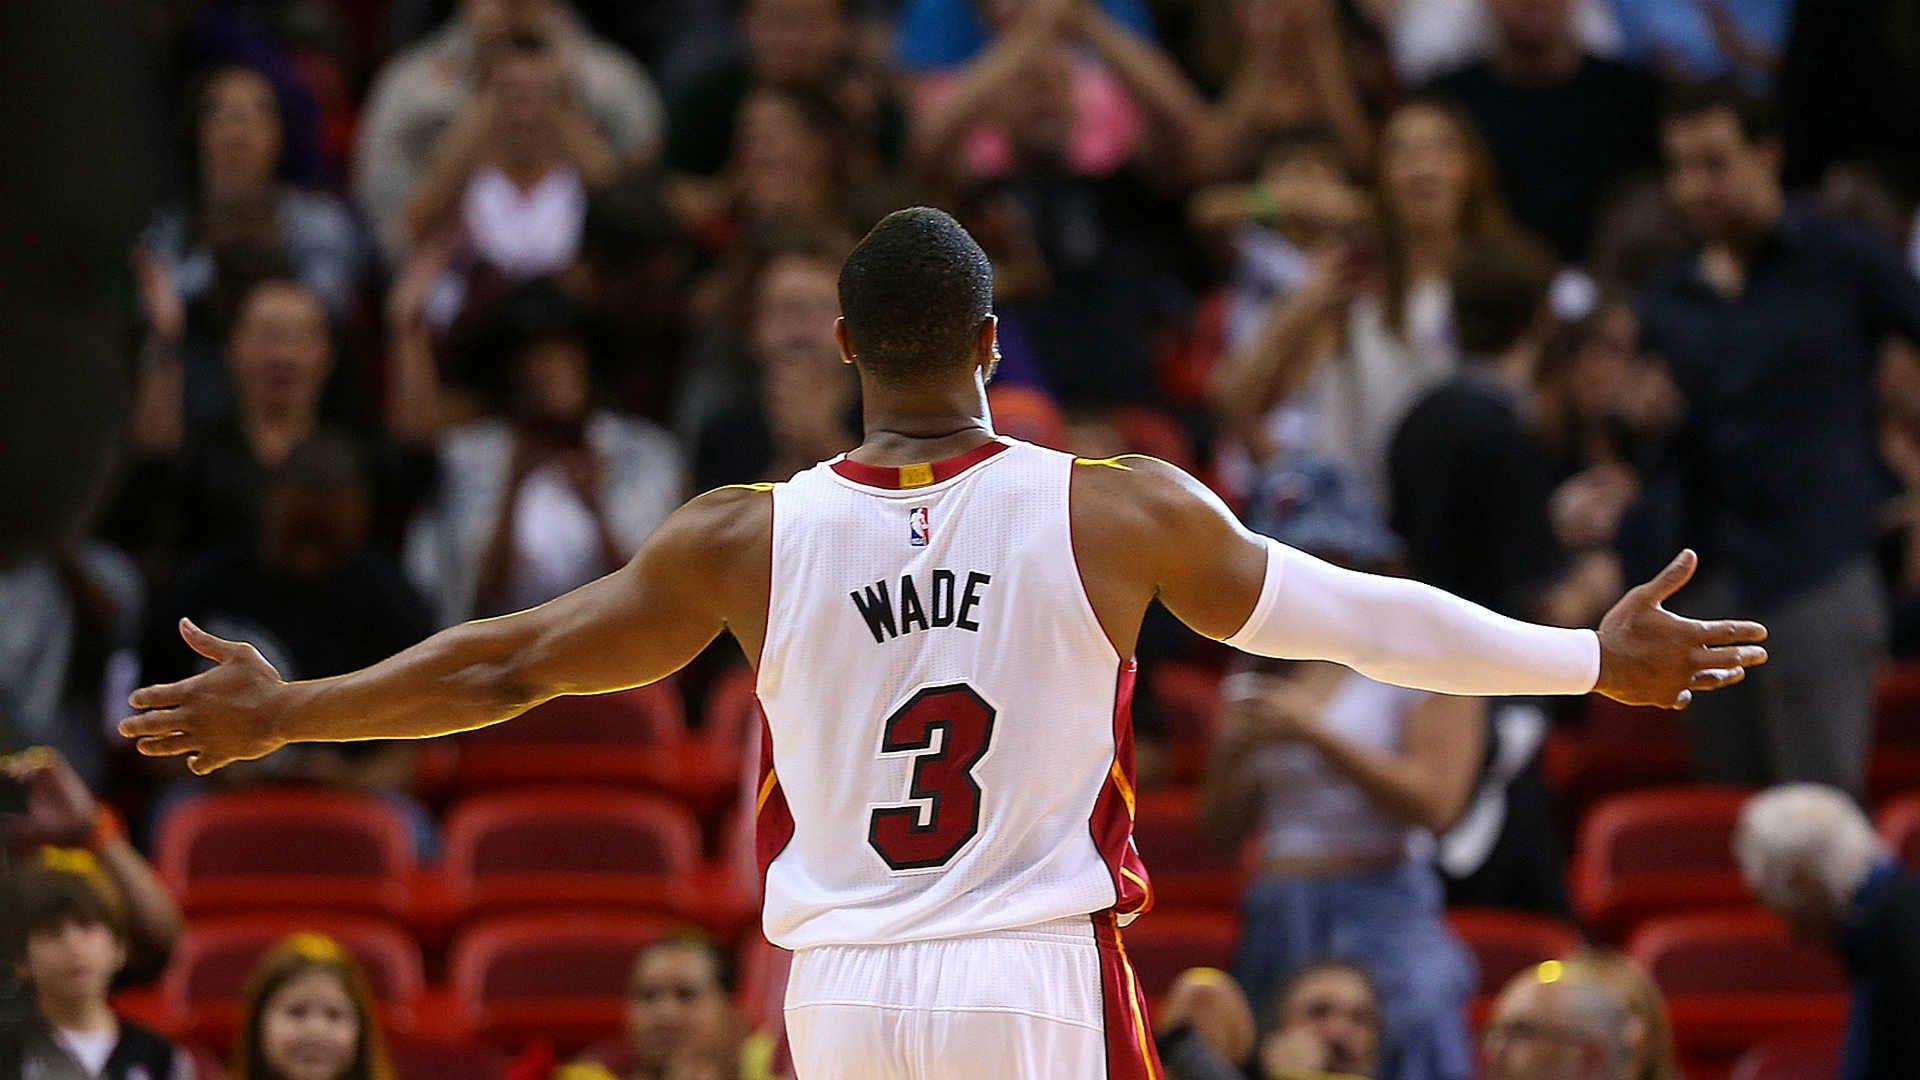 Dwyane Wade's Return a Hella Dramatic Swan Song. But WadeCounty One More Year! Let's